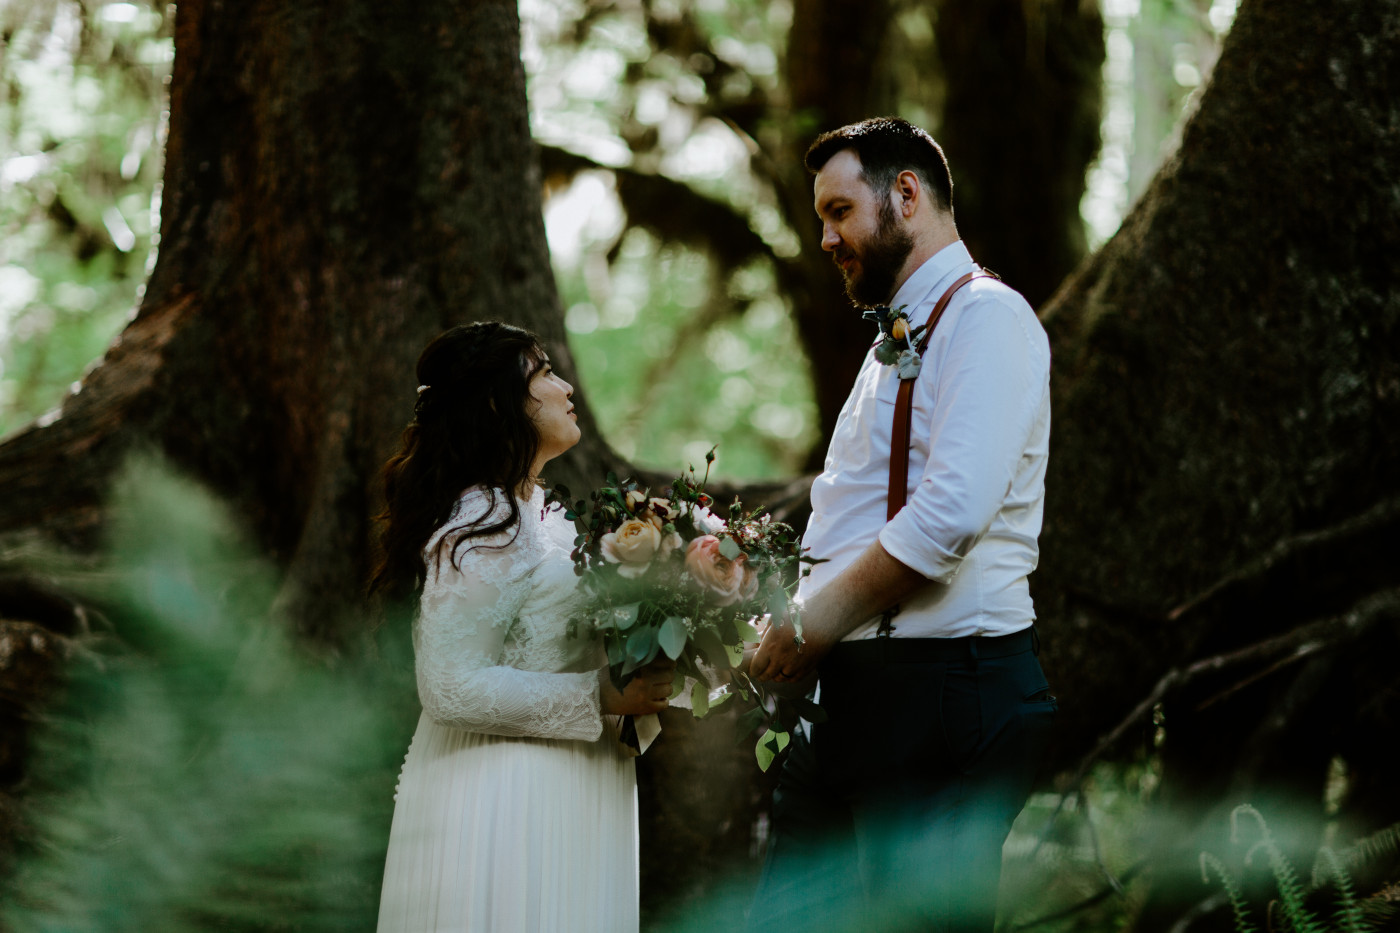 Jack smiles at Brooke. Elopement photography at Olympic National Park by Sienna Plus Josh.